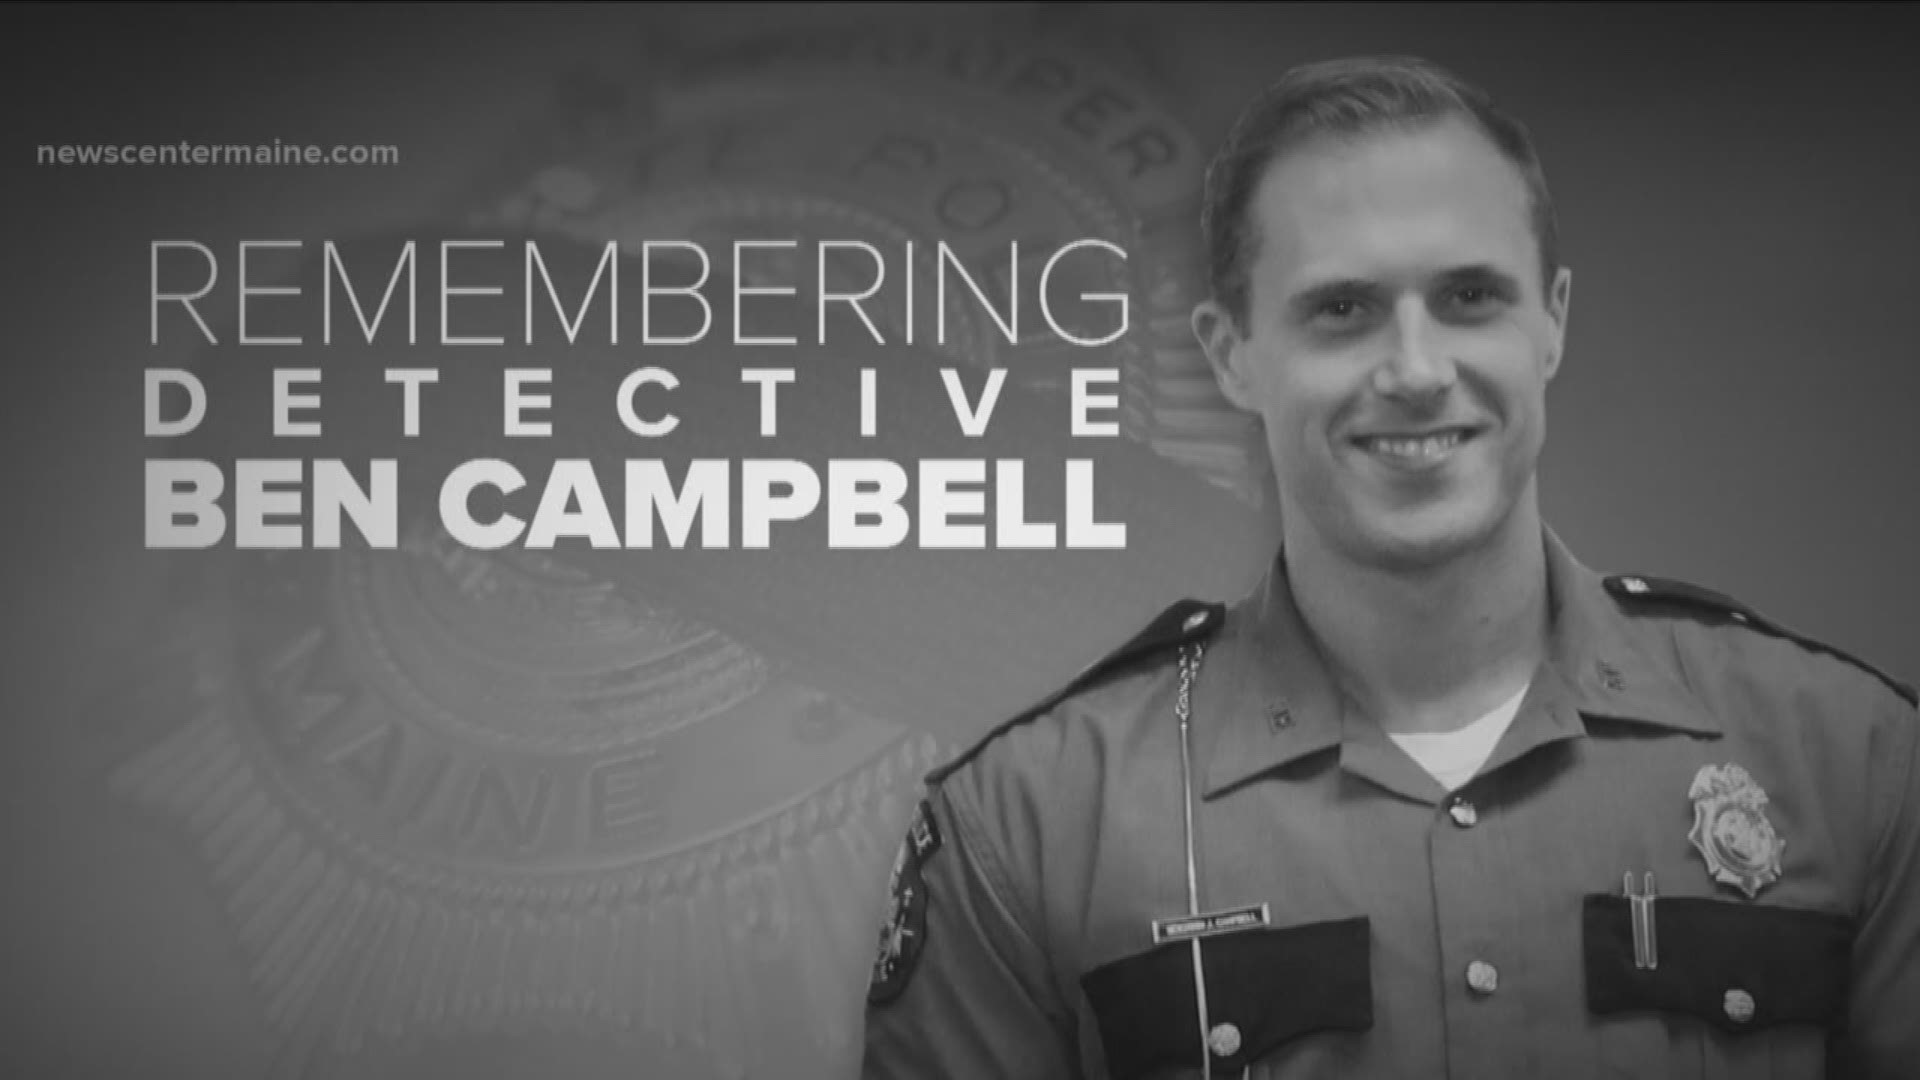 Maine remembers Detective Ben Campbell, the Maine trooper killed in the line of duty last Wednesday